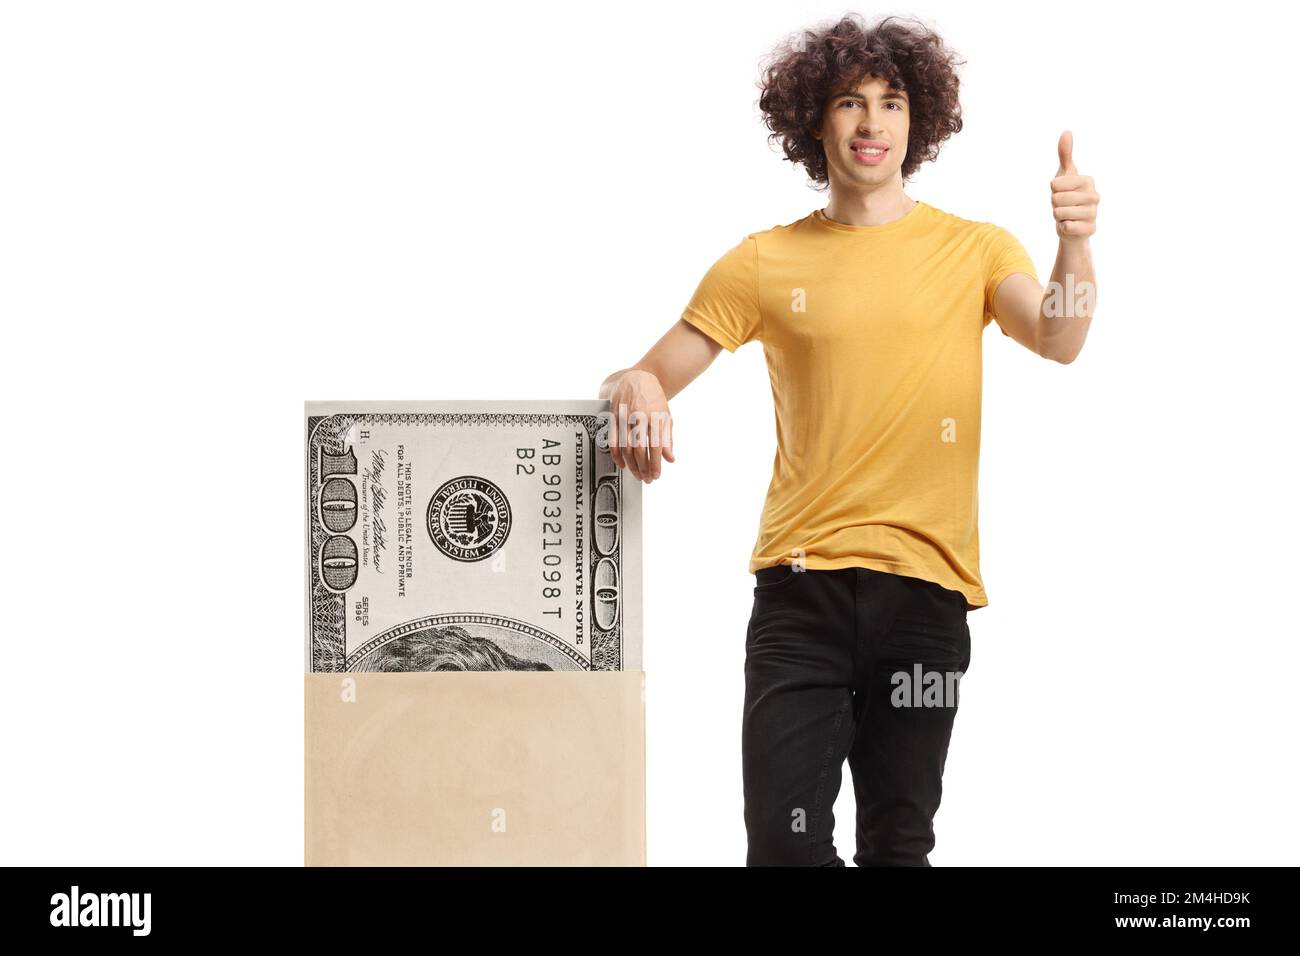 Young man with curly hair leaning on a stack of money and showing thumbs up isolated on white background Stock Photo